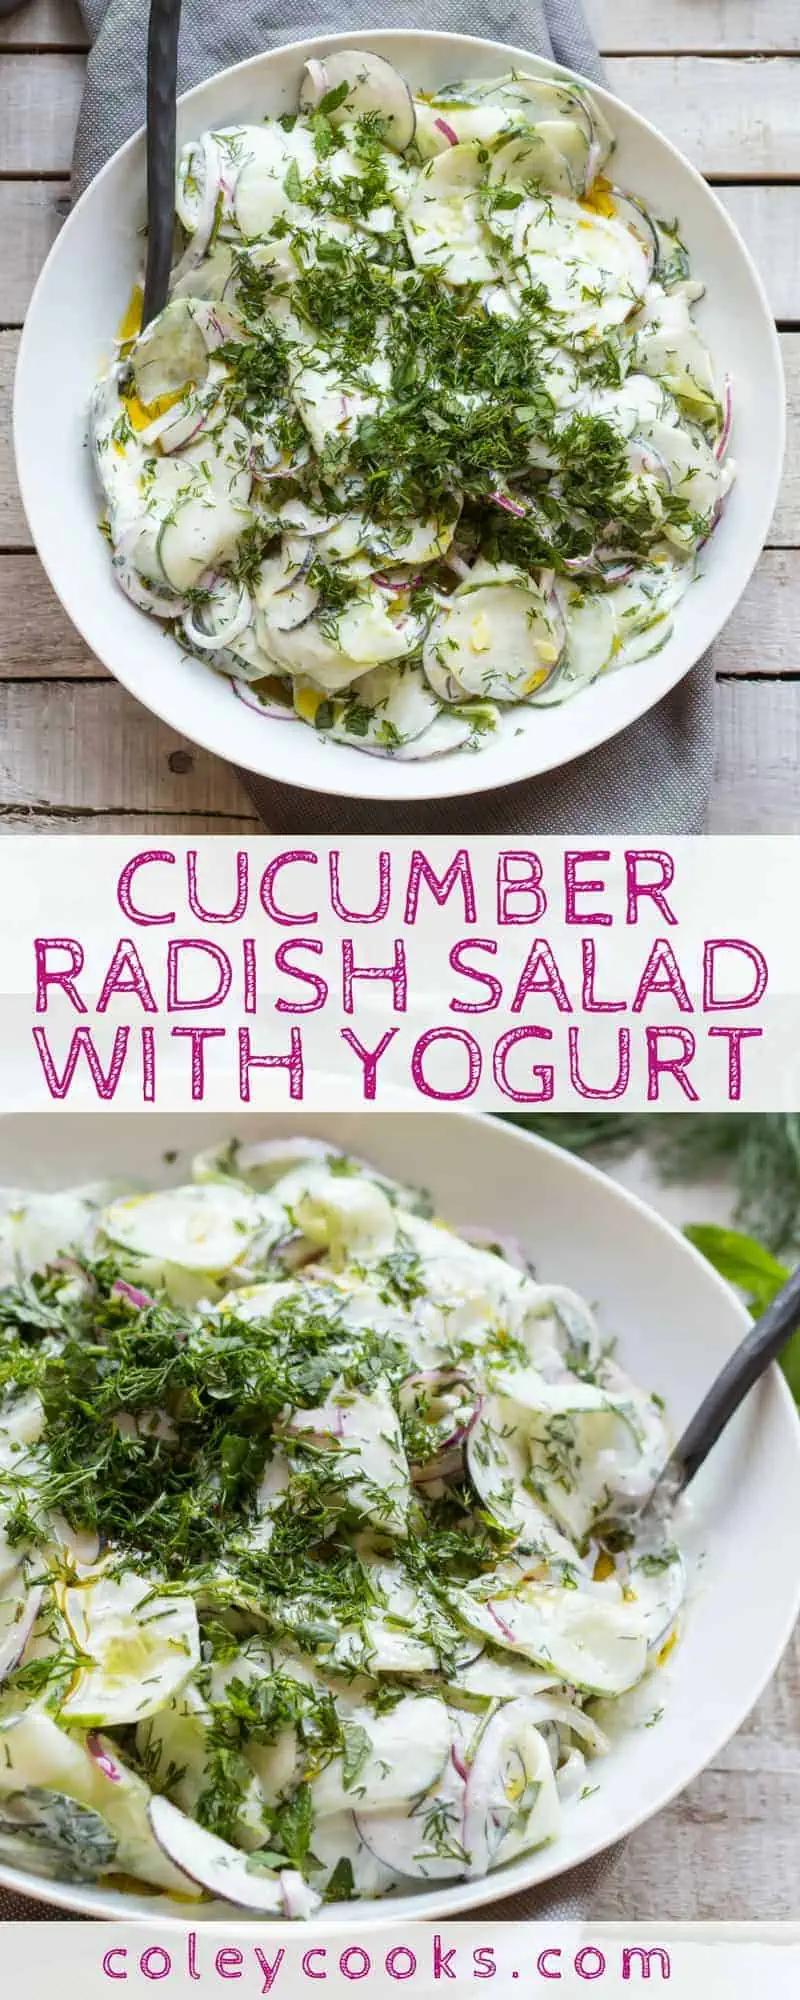 CUCUMBER RADISH SALAD with YOGURT | This summer salad is light, crisp, creamy, and so refreshing! It makes the best summer side to any grilled dinner! #glutenfree #vegetarian | ColeyCooks.com